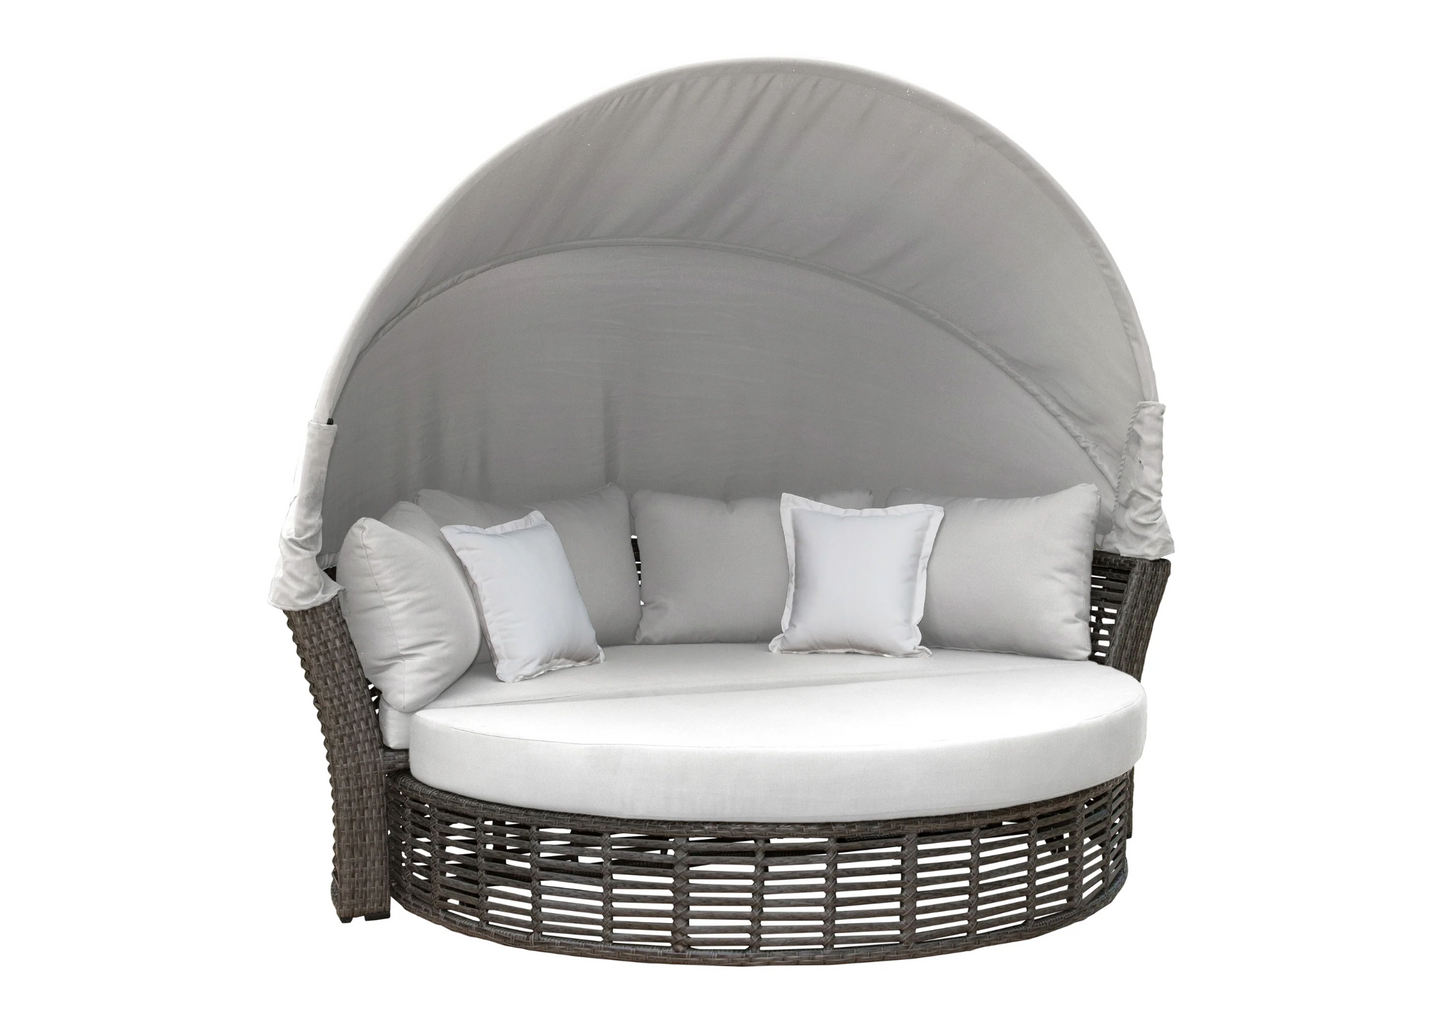 PANAMA JACK GRAPHITE CANOPY DAYBED WITH CUSHIONS